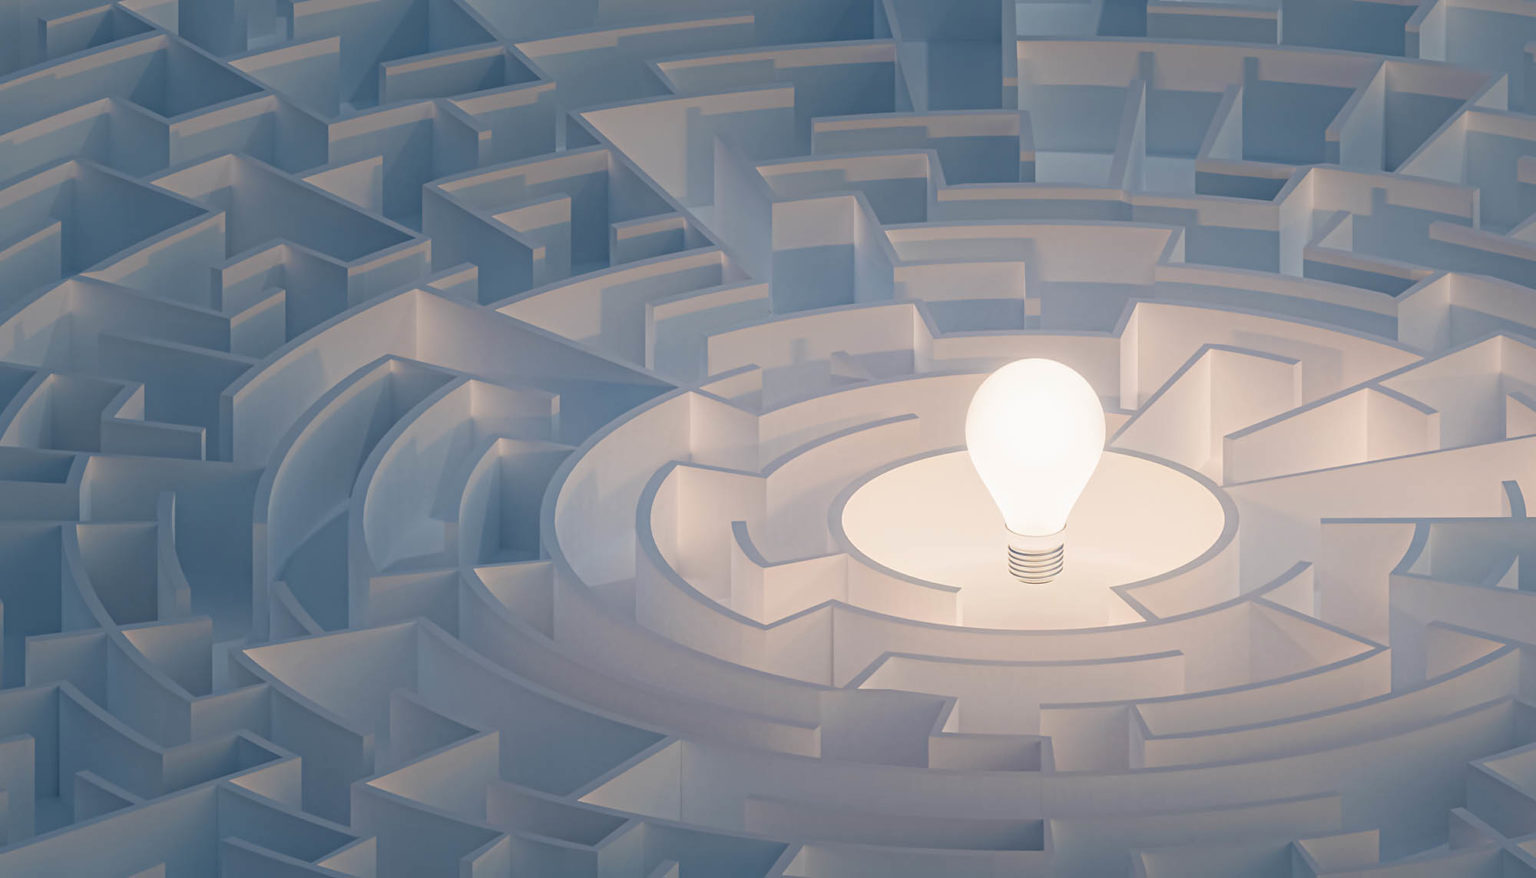 Circular maze or labyrinth with light bulb in its center. Puzzle, riddle, intelligence, thinking, solution, IQ concepts. 3d render illustration for ceo coaching.